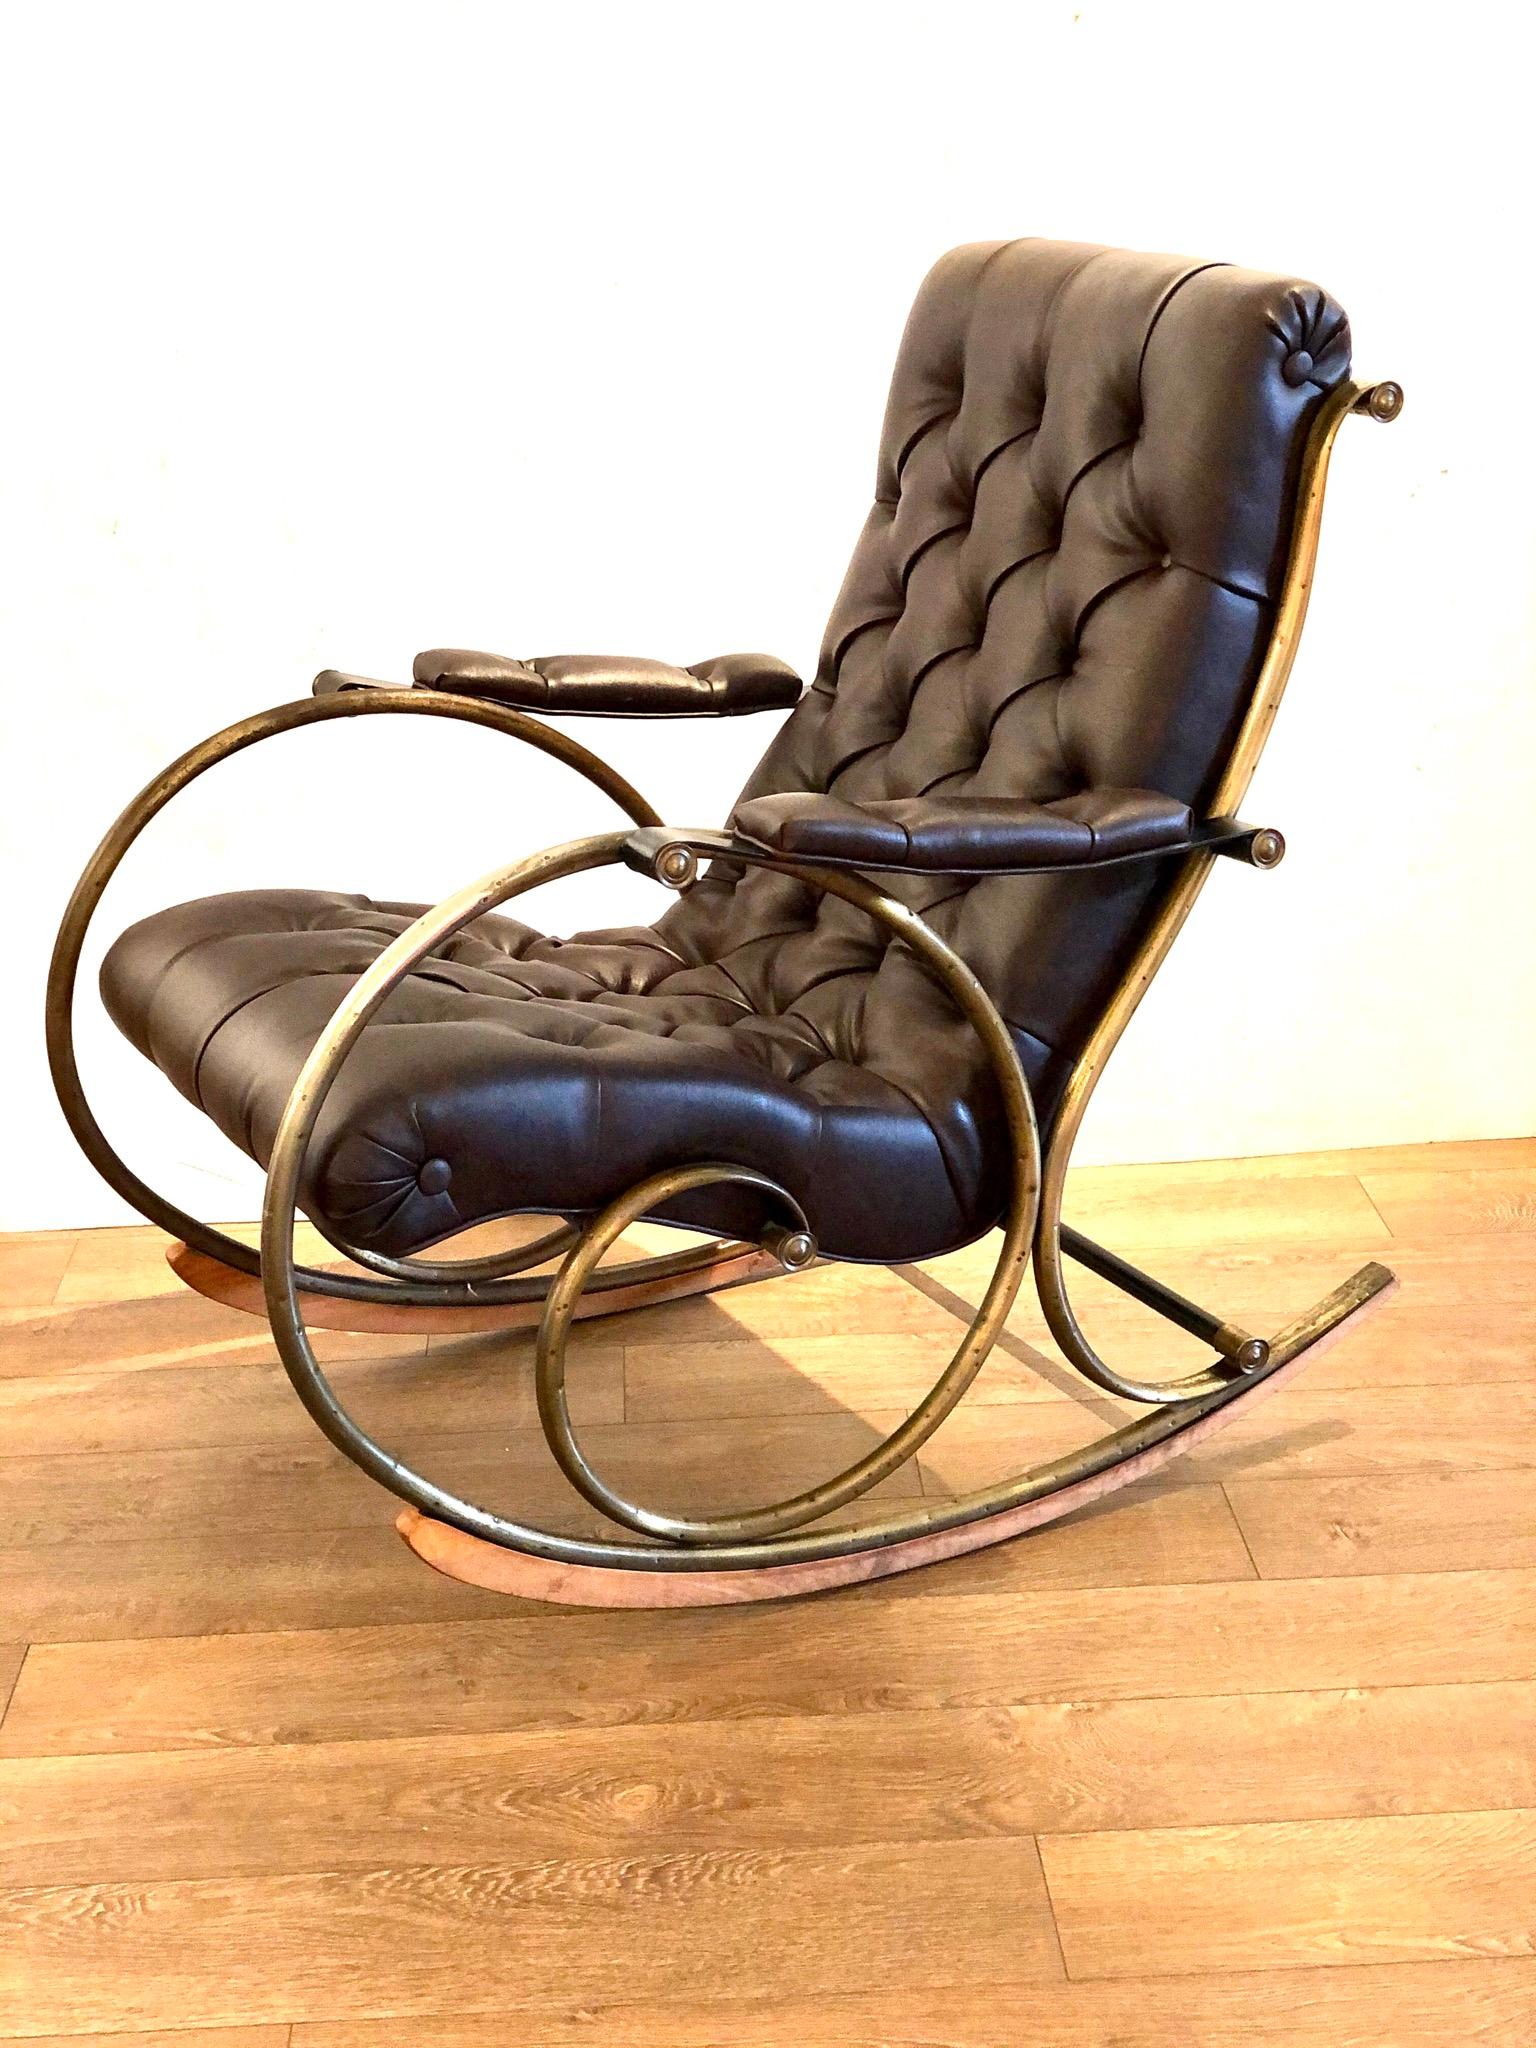 Beautifully designed sculptural rocker by Lee Woodard, with a tufted Naugahyde body and brass railing, circa 1950s in brown Naugahyde, very nice condition, the brass plating on the pipping its worn as shown and some finish its gone due to age, that